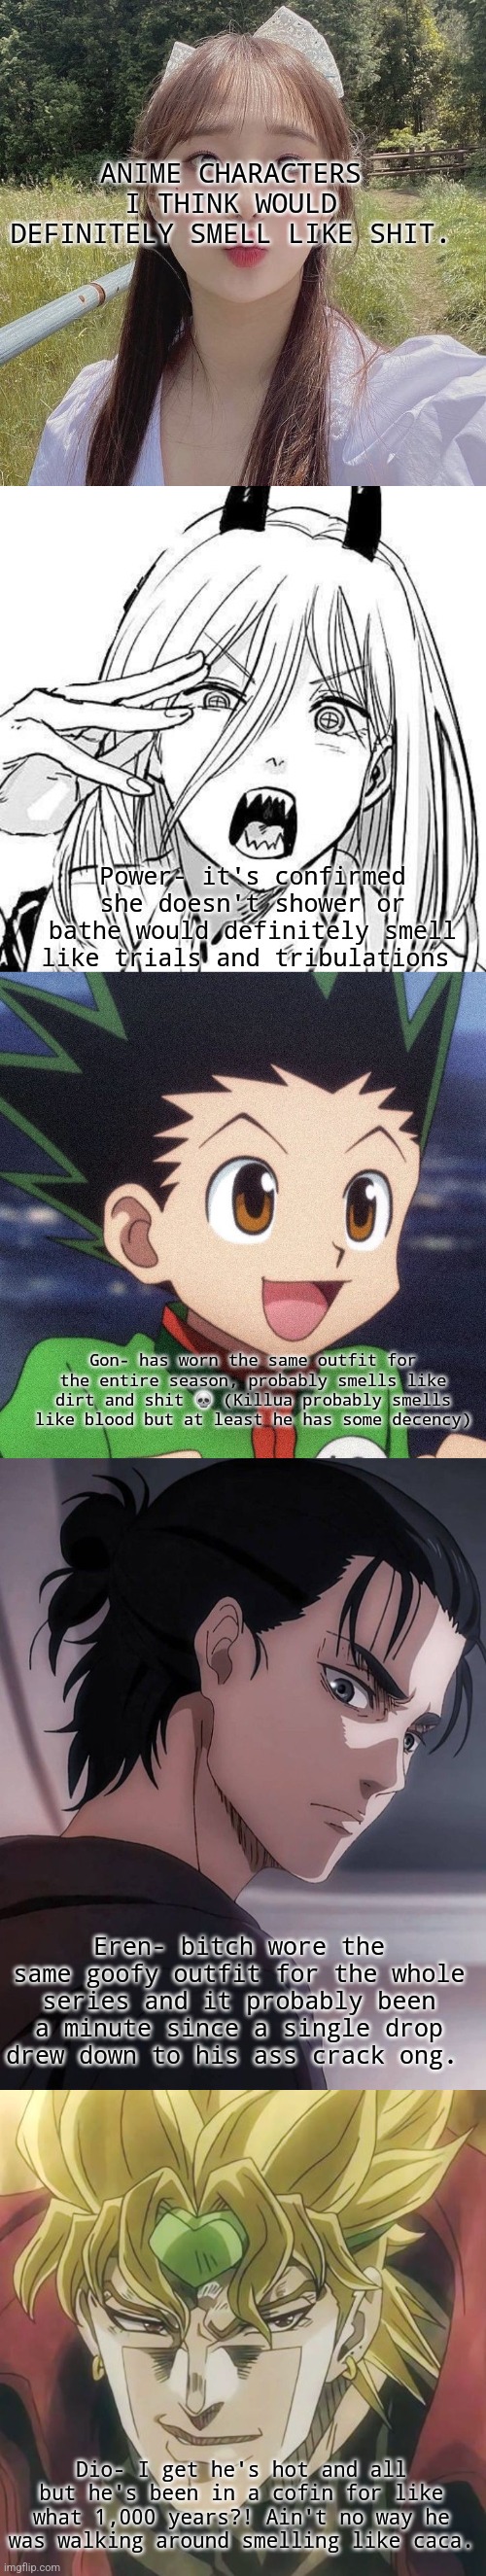 Pt 1 I think. (Tell me in the comments more characters that smell like shit) | ANIME CHARACTERS I THINK WOULD DEFINITELY SMELL LIKE SHIT. Power- it's confirmed she doesn't shower or bathe would definitely smell like trials and tribulations; Gon- has worn the same outfit for the entire season, probably smells like dirt and shit 💀 (Killua probably smells like blood but at least he has some decency); Eren- bitch wore the same goofy outfit for the whole series and it probably been a minute since a single drop drew down to his ass crack ong. Dio- I get he's hot and all but he's been in a cofin for like what 1,000 years?! Ain't no way he was walking around smelling like caca. | image tagged in anime,chuu | made w/ Imgflip meme maker